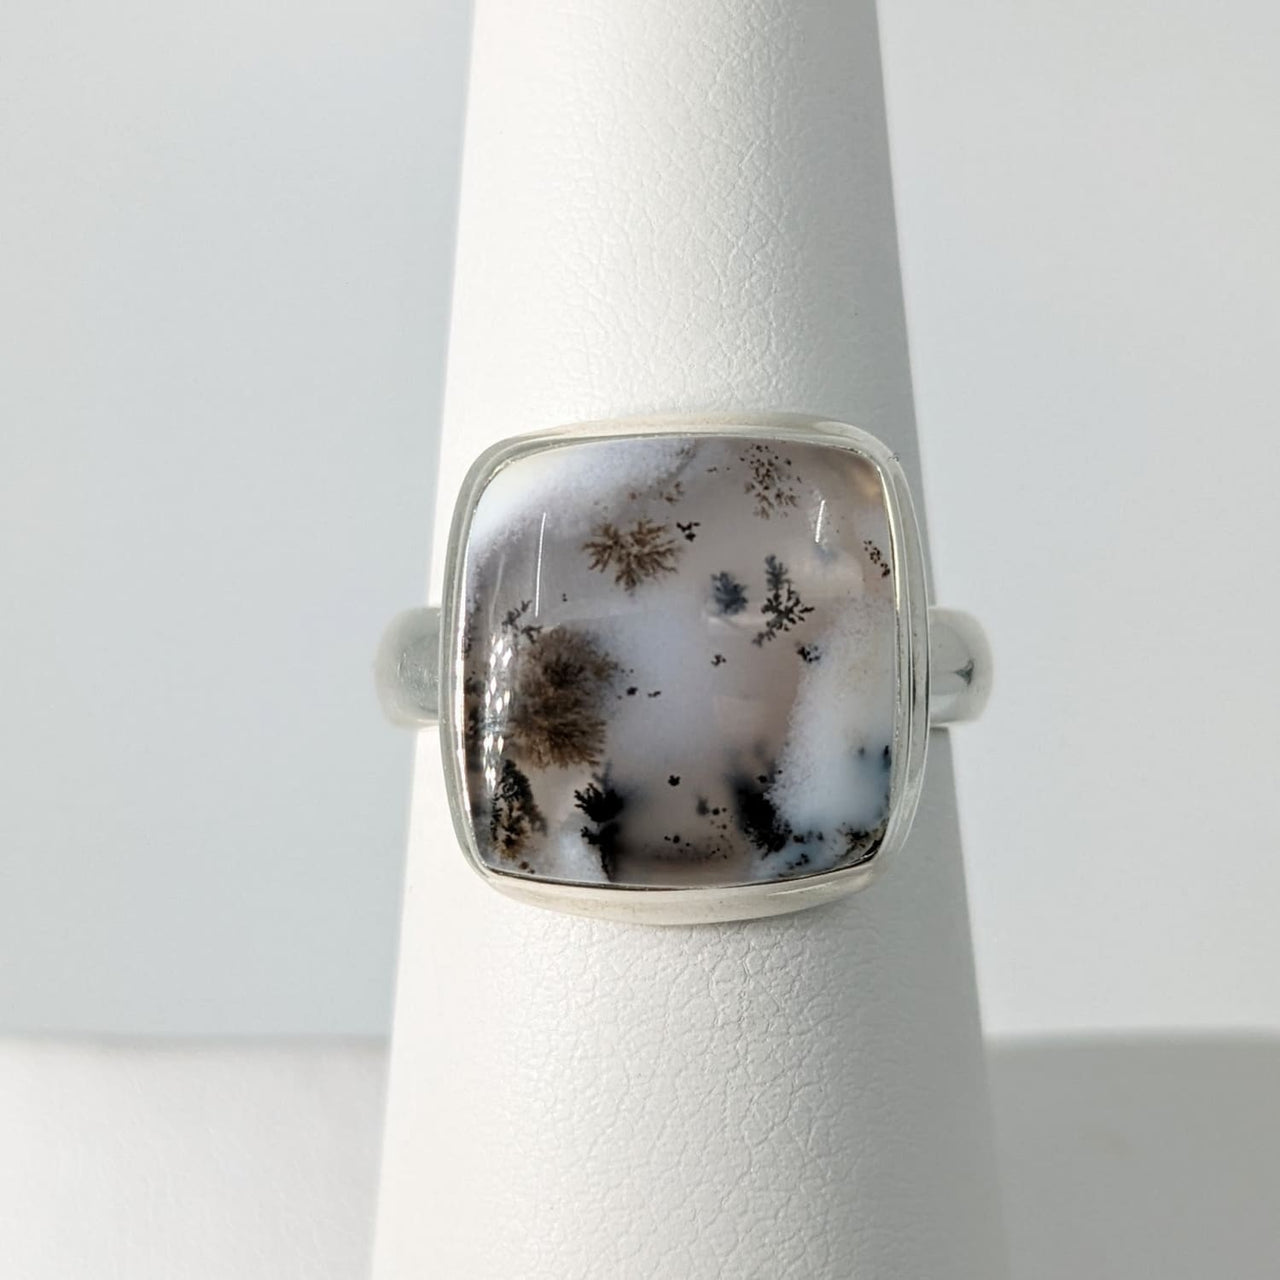 Dendrite Agate Square Sterling Silver Ring Sz. 6 #SK8337 - 